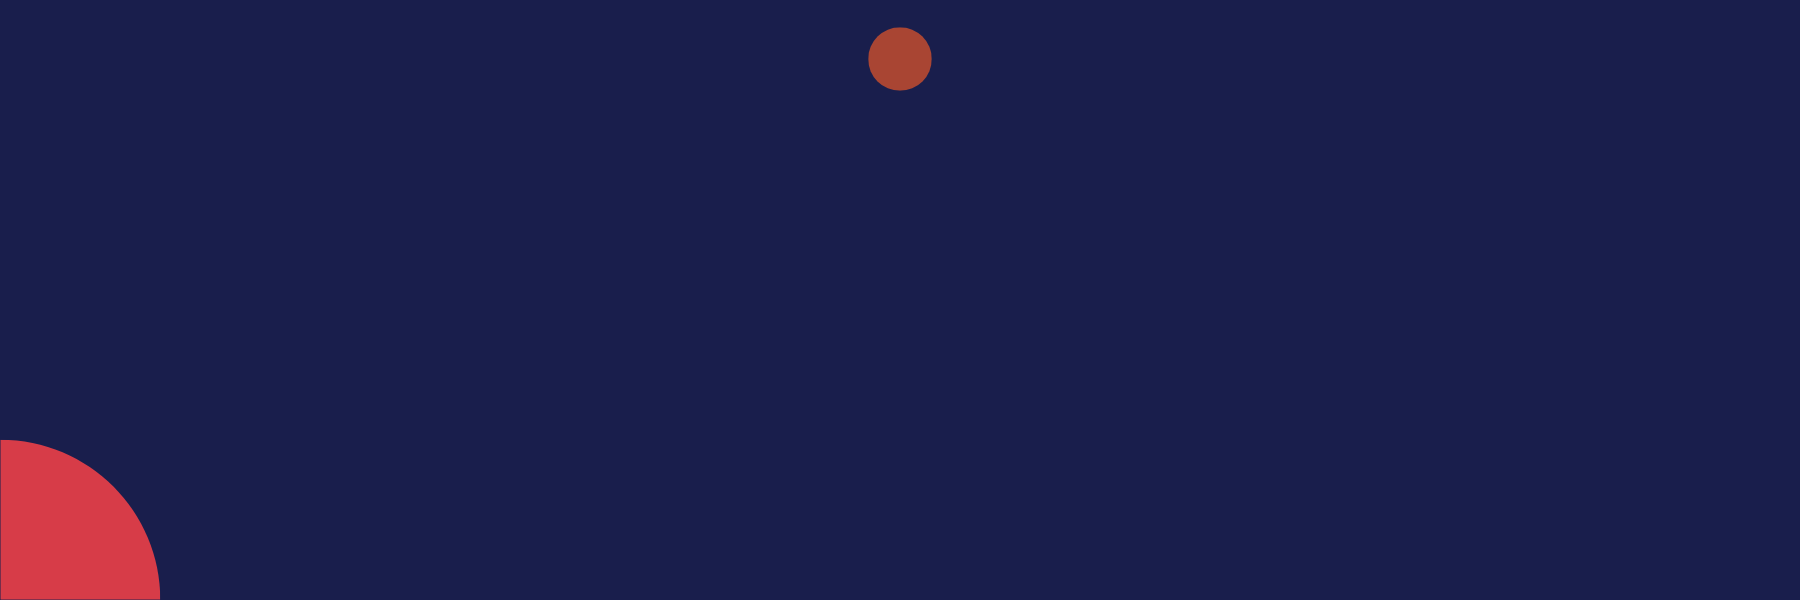 Dark blue background with circular shapes.